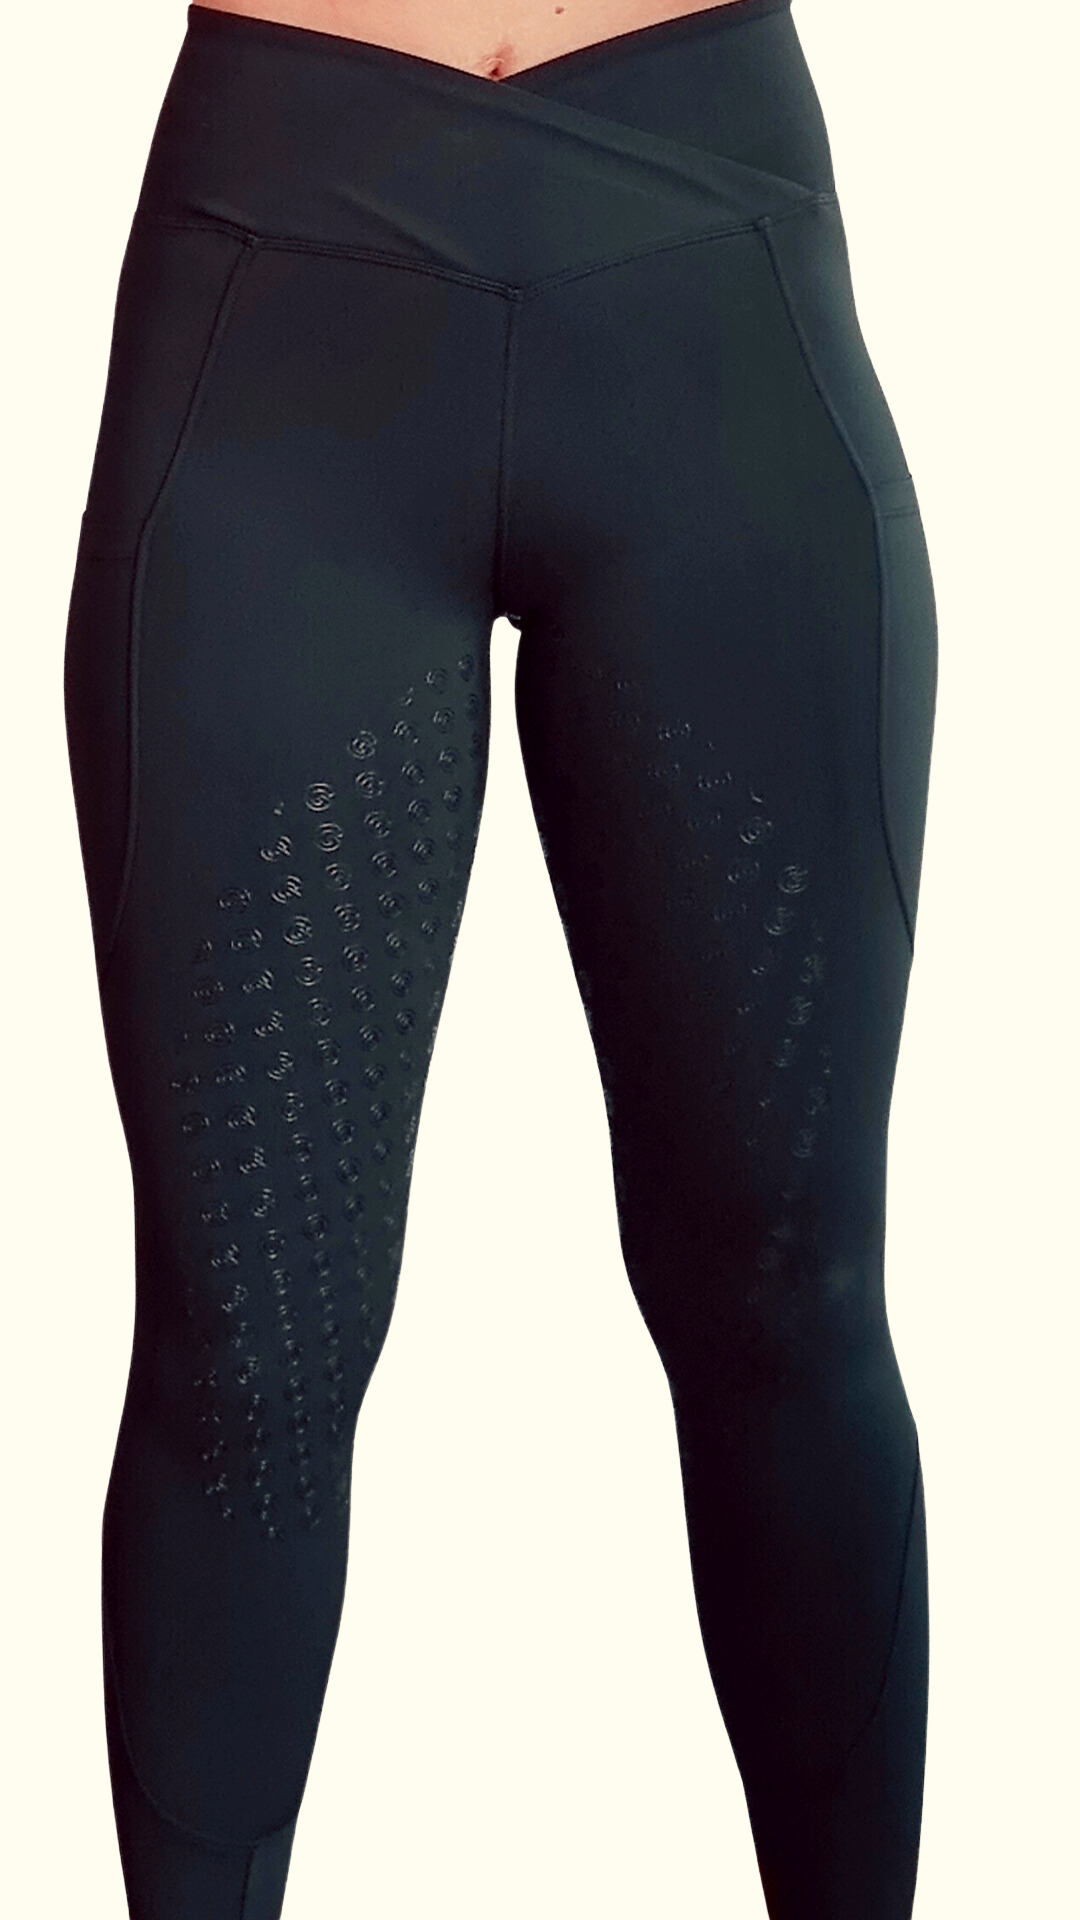 V-shape riding leggings LIMITED EDITION PASTELS – The Good Gallop